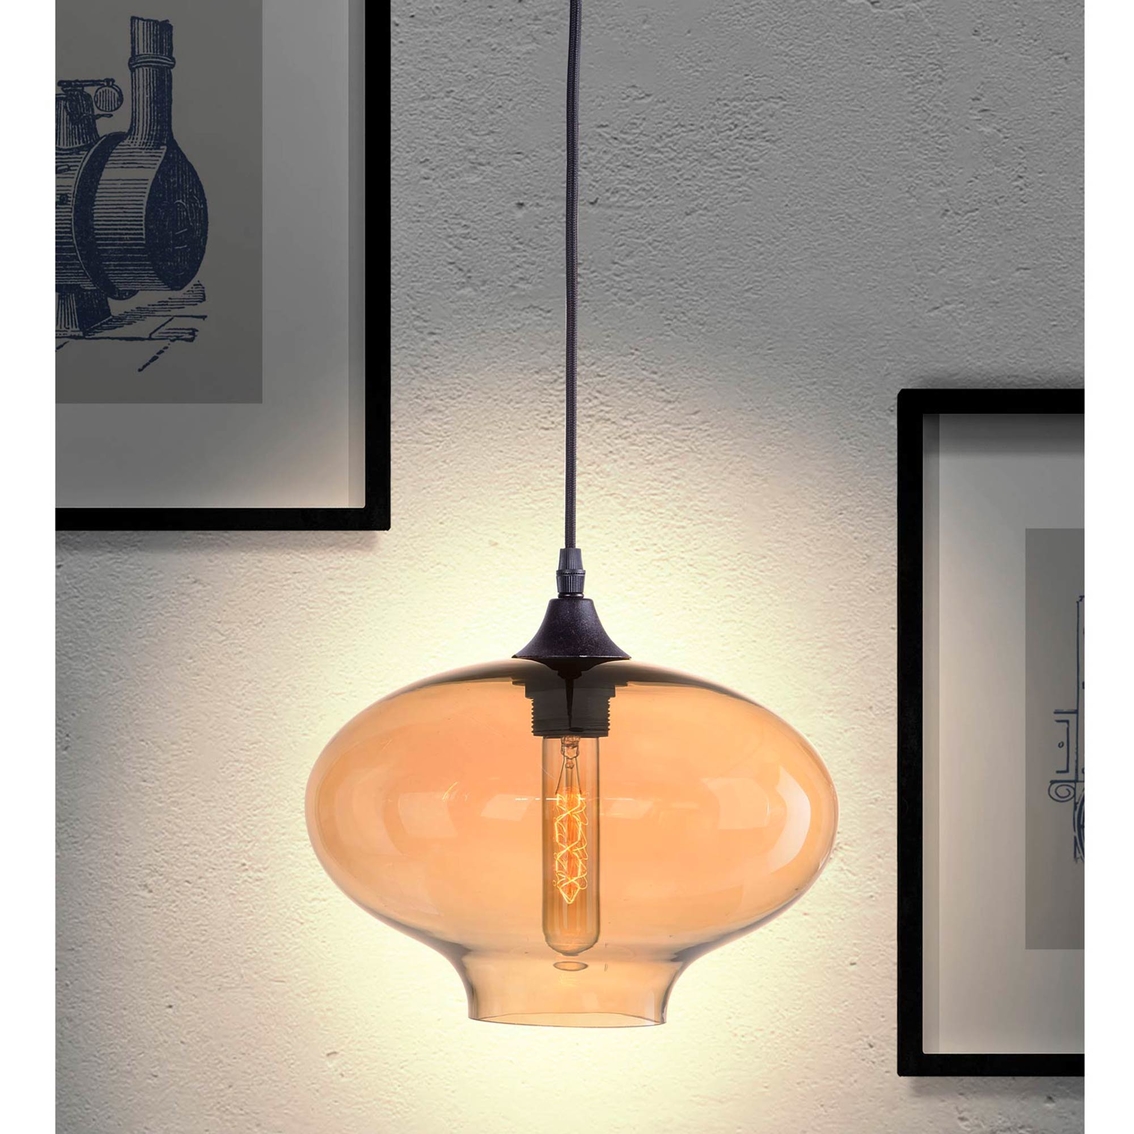 Zuo Borax Ceiling Lamp - Image 3 of 3